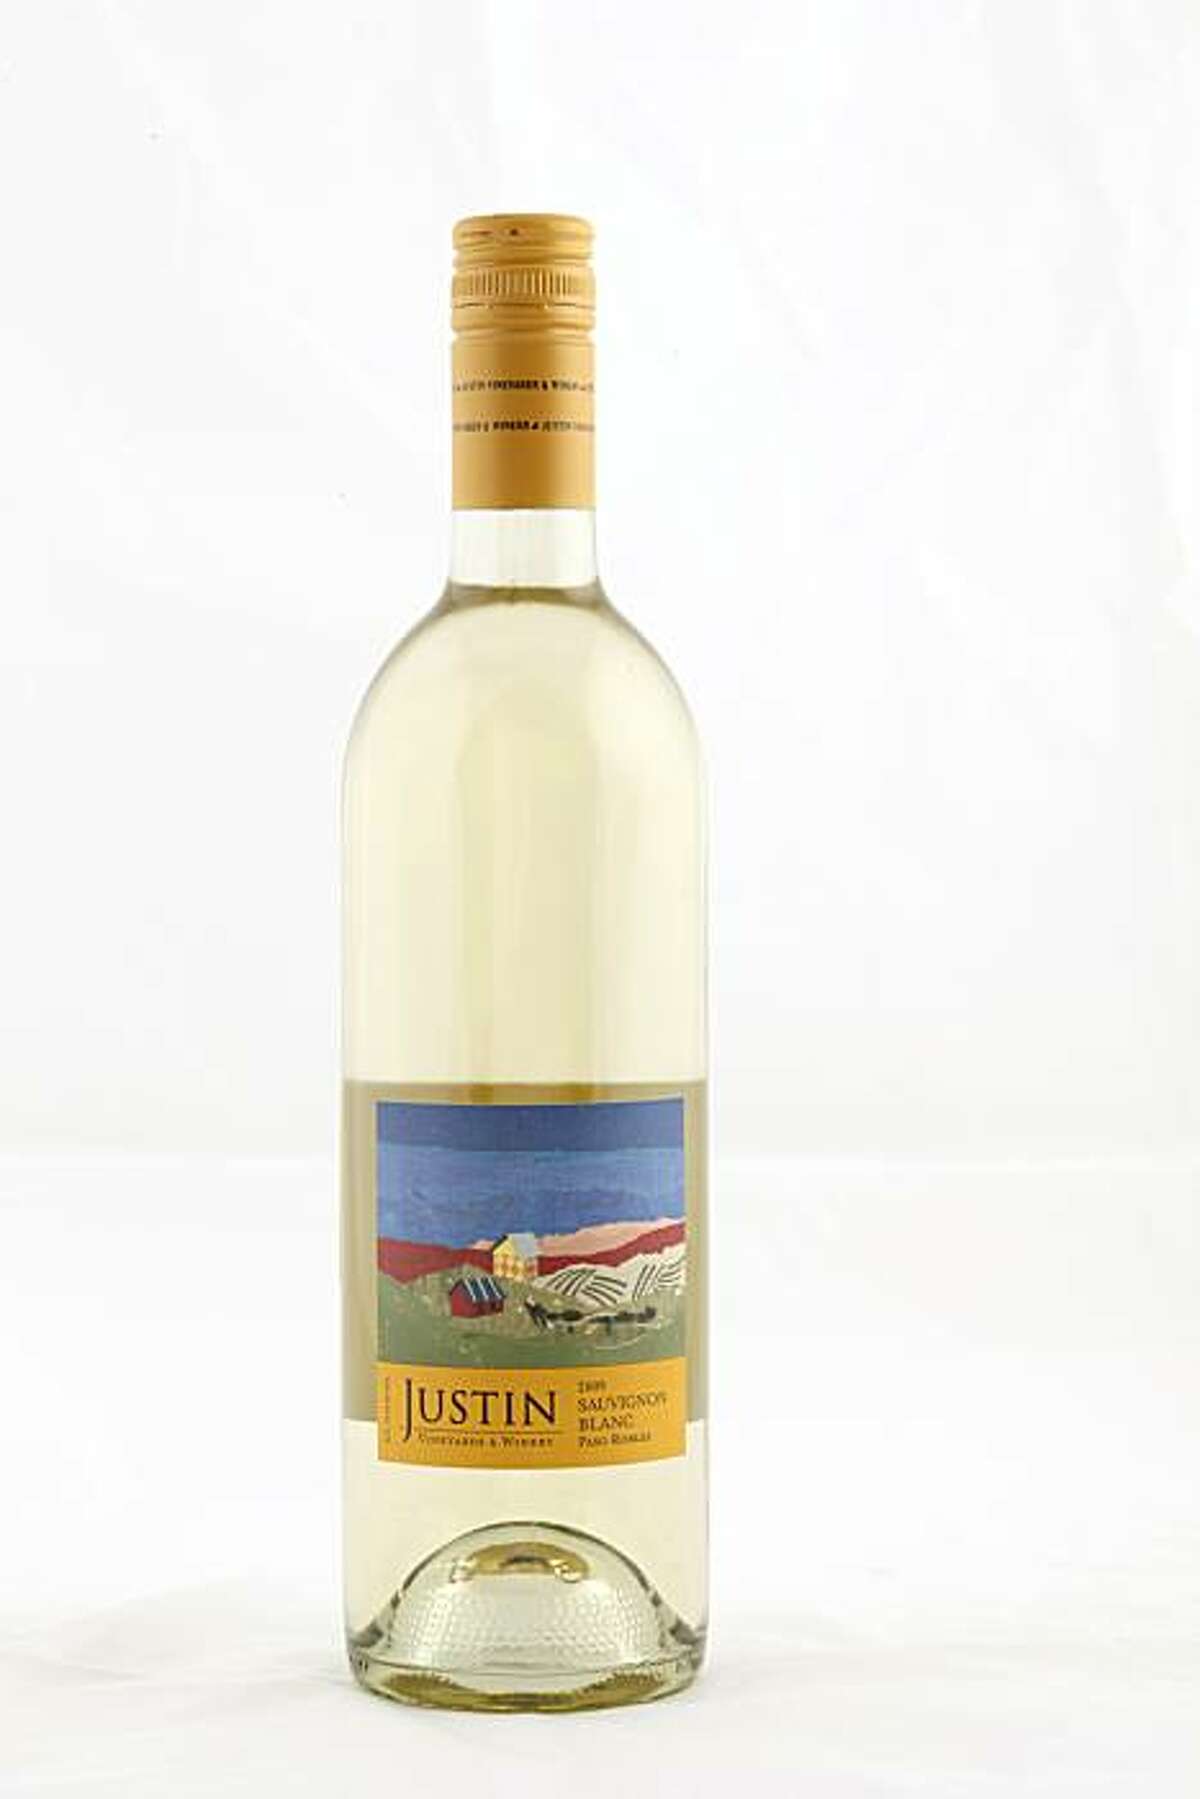 2009 Justin Vineyards and Winery Sauvignon Blanc Paso Robles in San Francisco, Calif., on September 8, 2010.